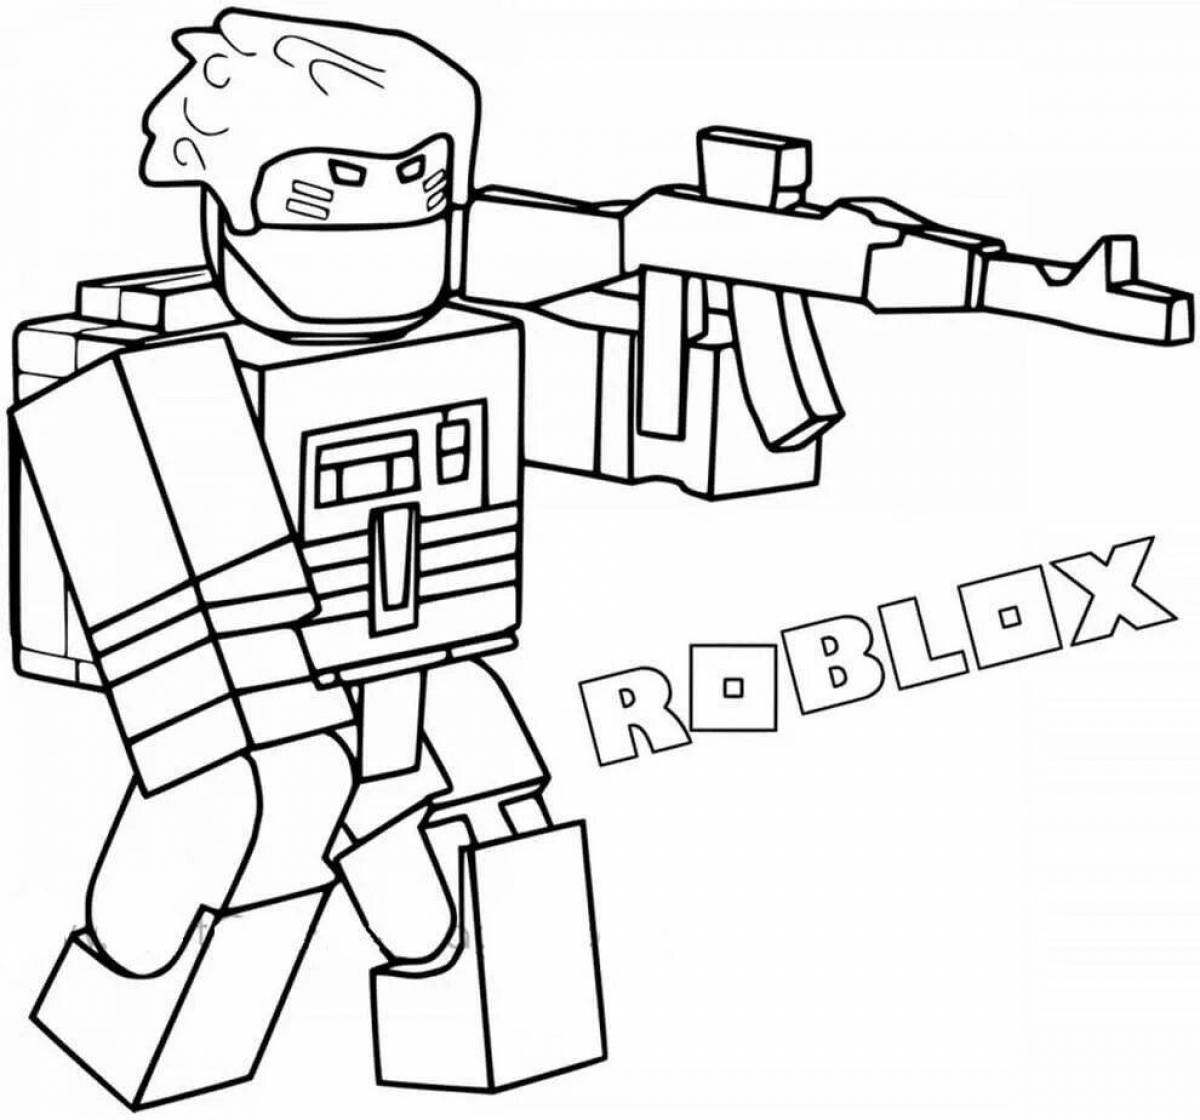 Color-explosion coloring page robloxers